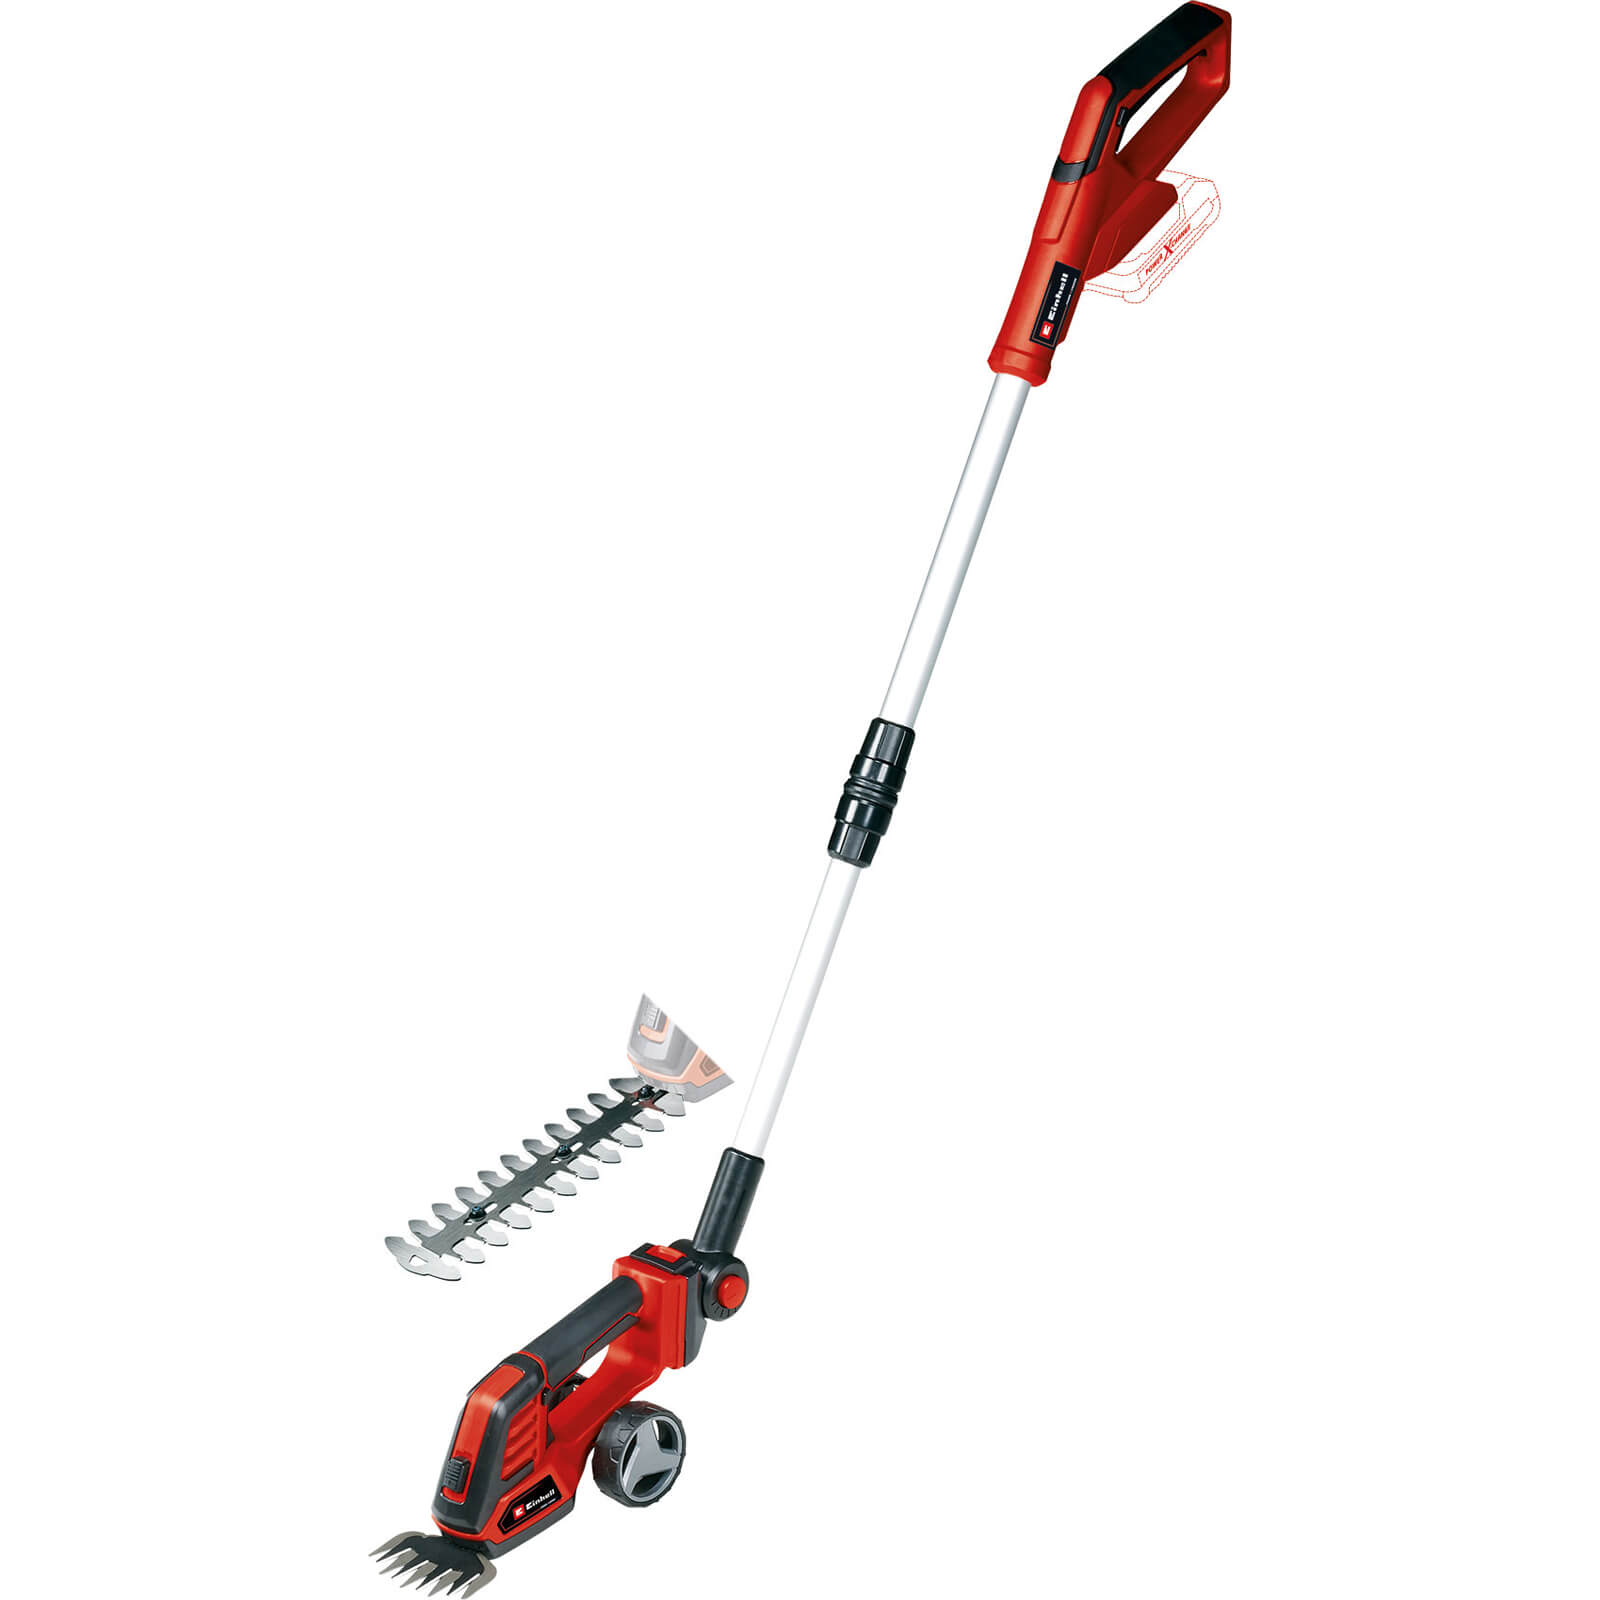 Photos - Hedge Trimmer Einhell GE-CG 18/100 Li T 18v Cordless Grass Shears and Handle No Batterie 